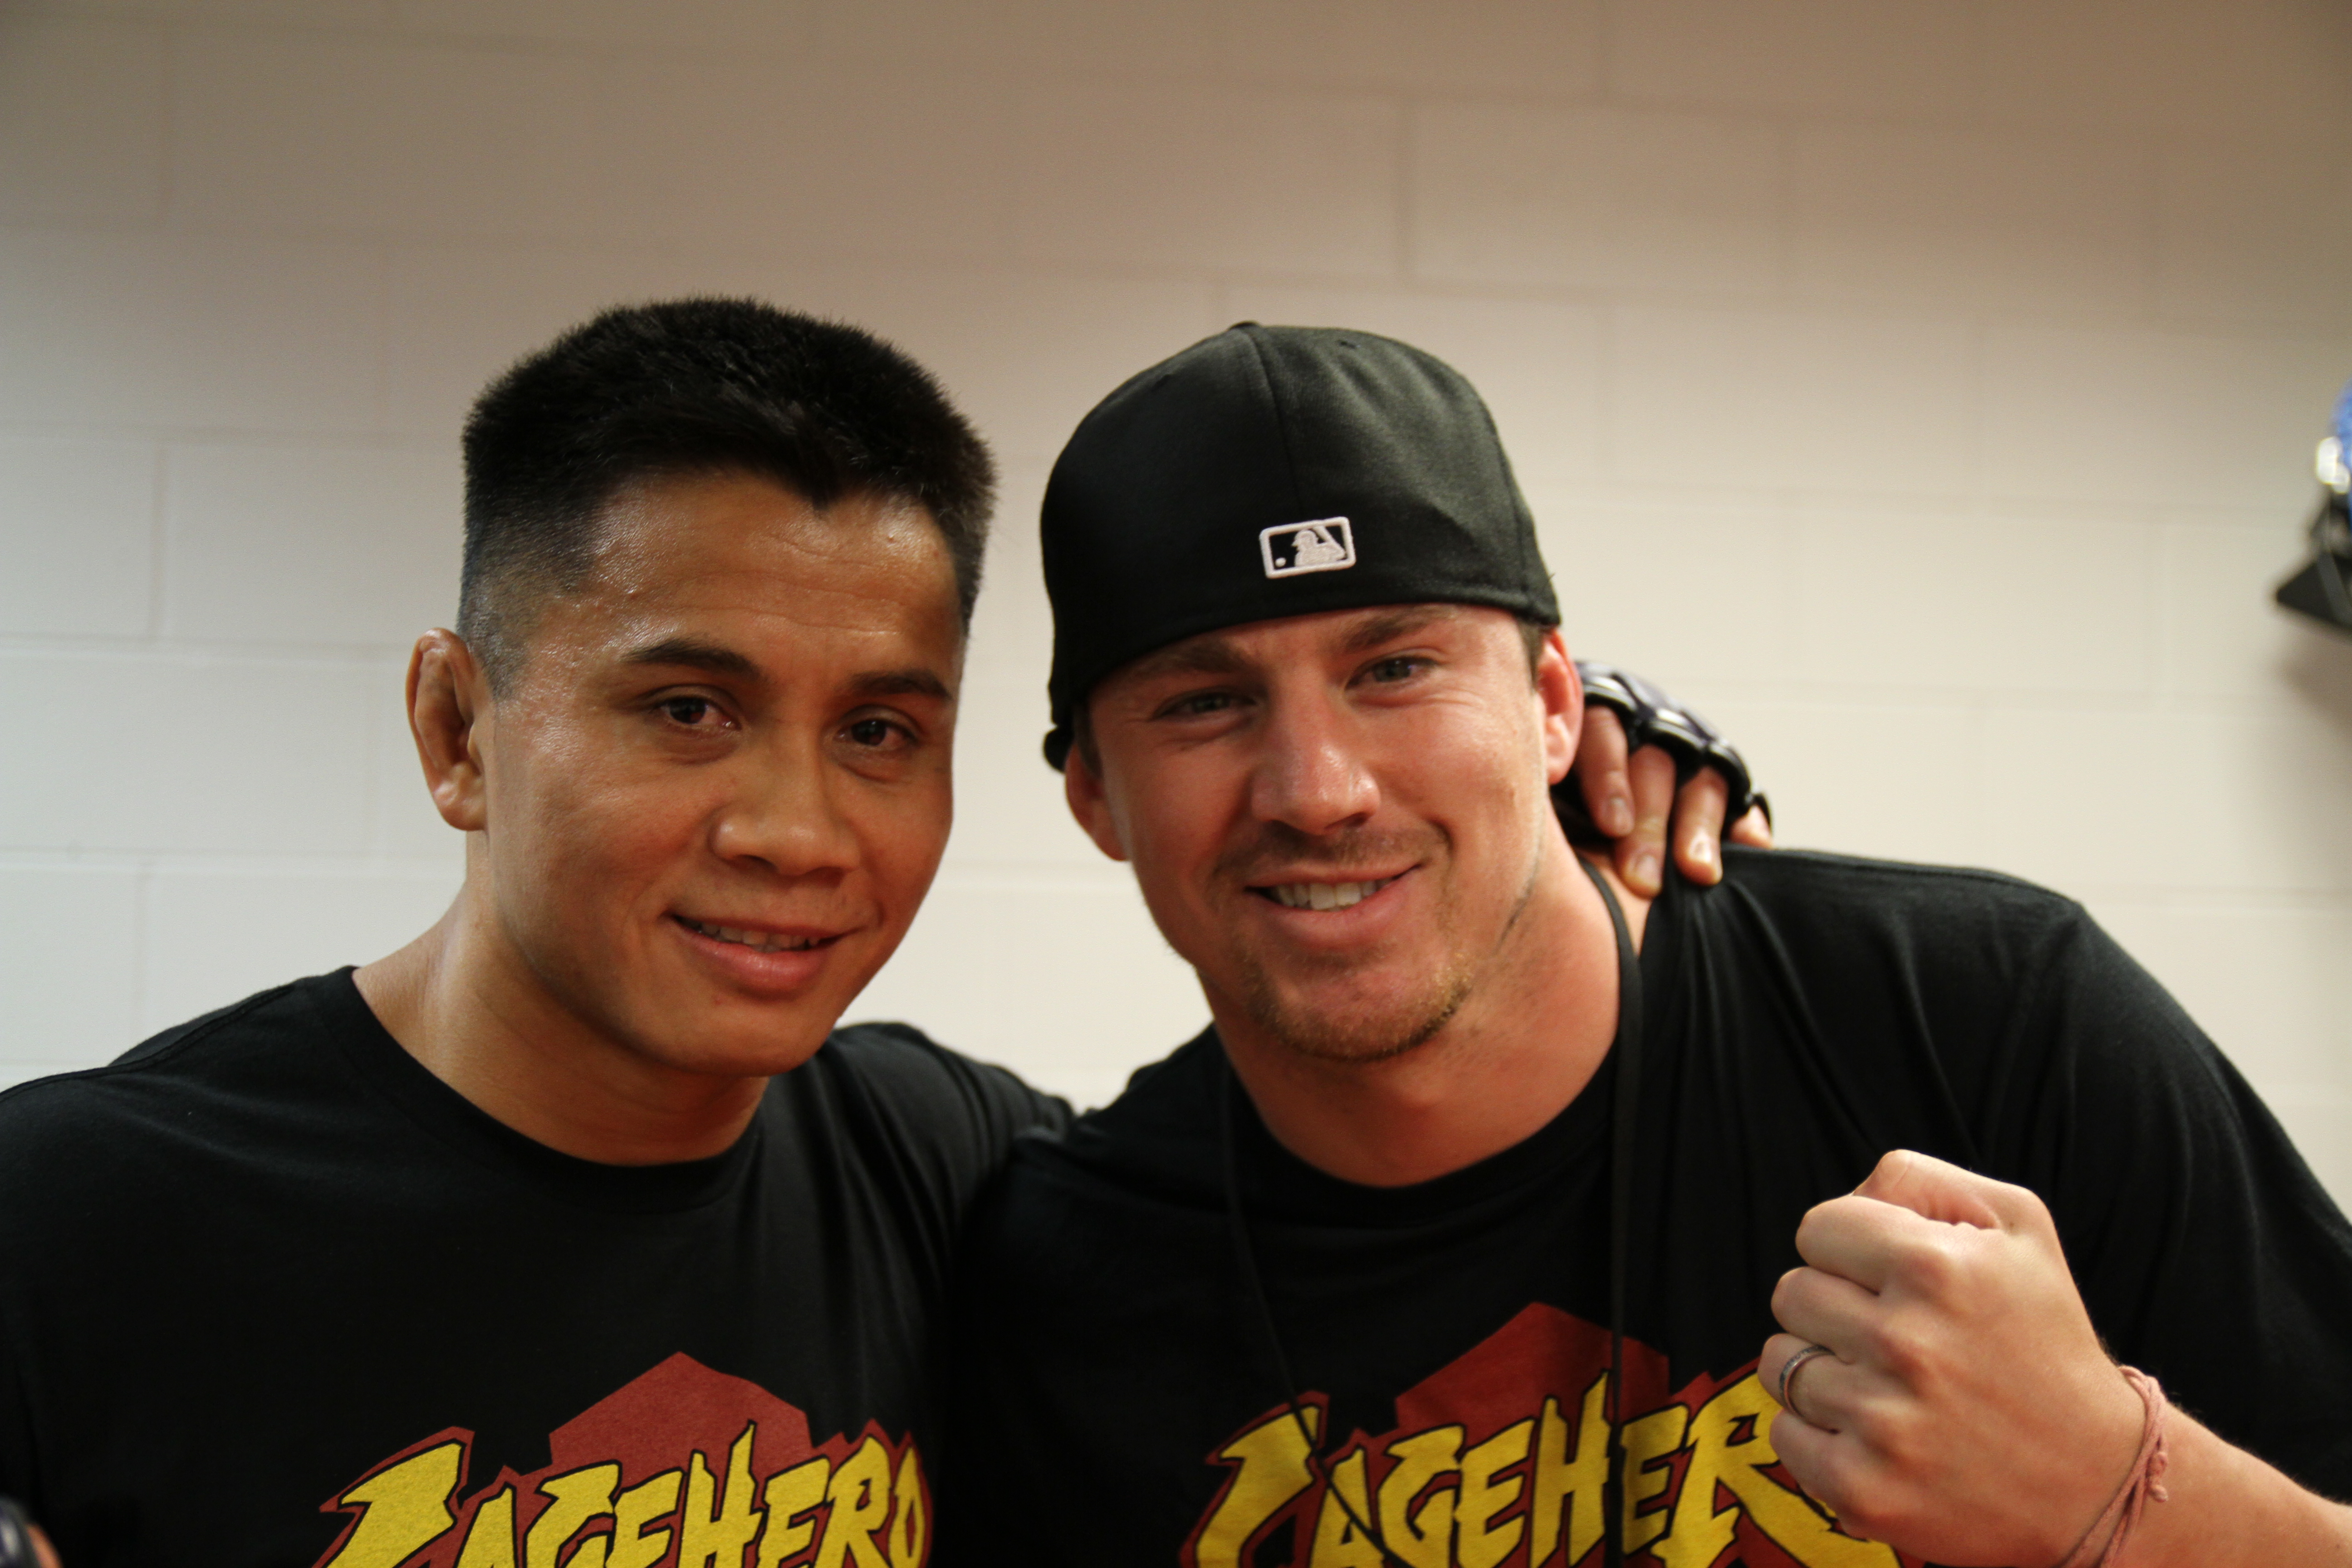 Cung Le and Channing back stage before Cung Le vs Scott Smith 2 fight.